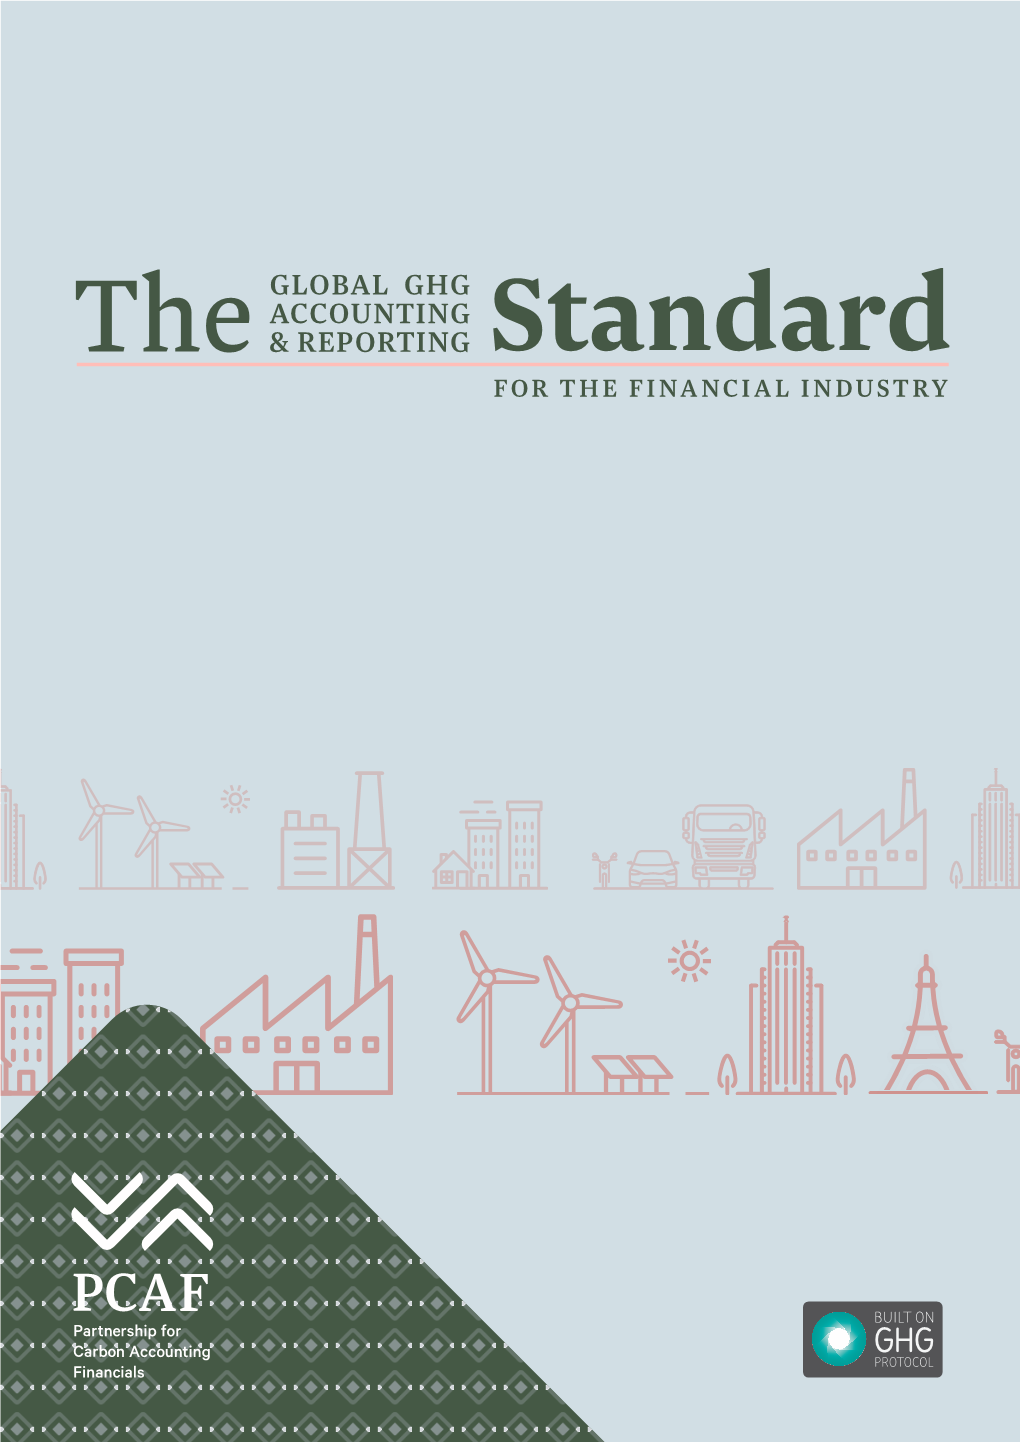 Global GHG Accounting and Reporting Standard for the Financial Industry